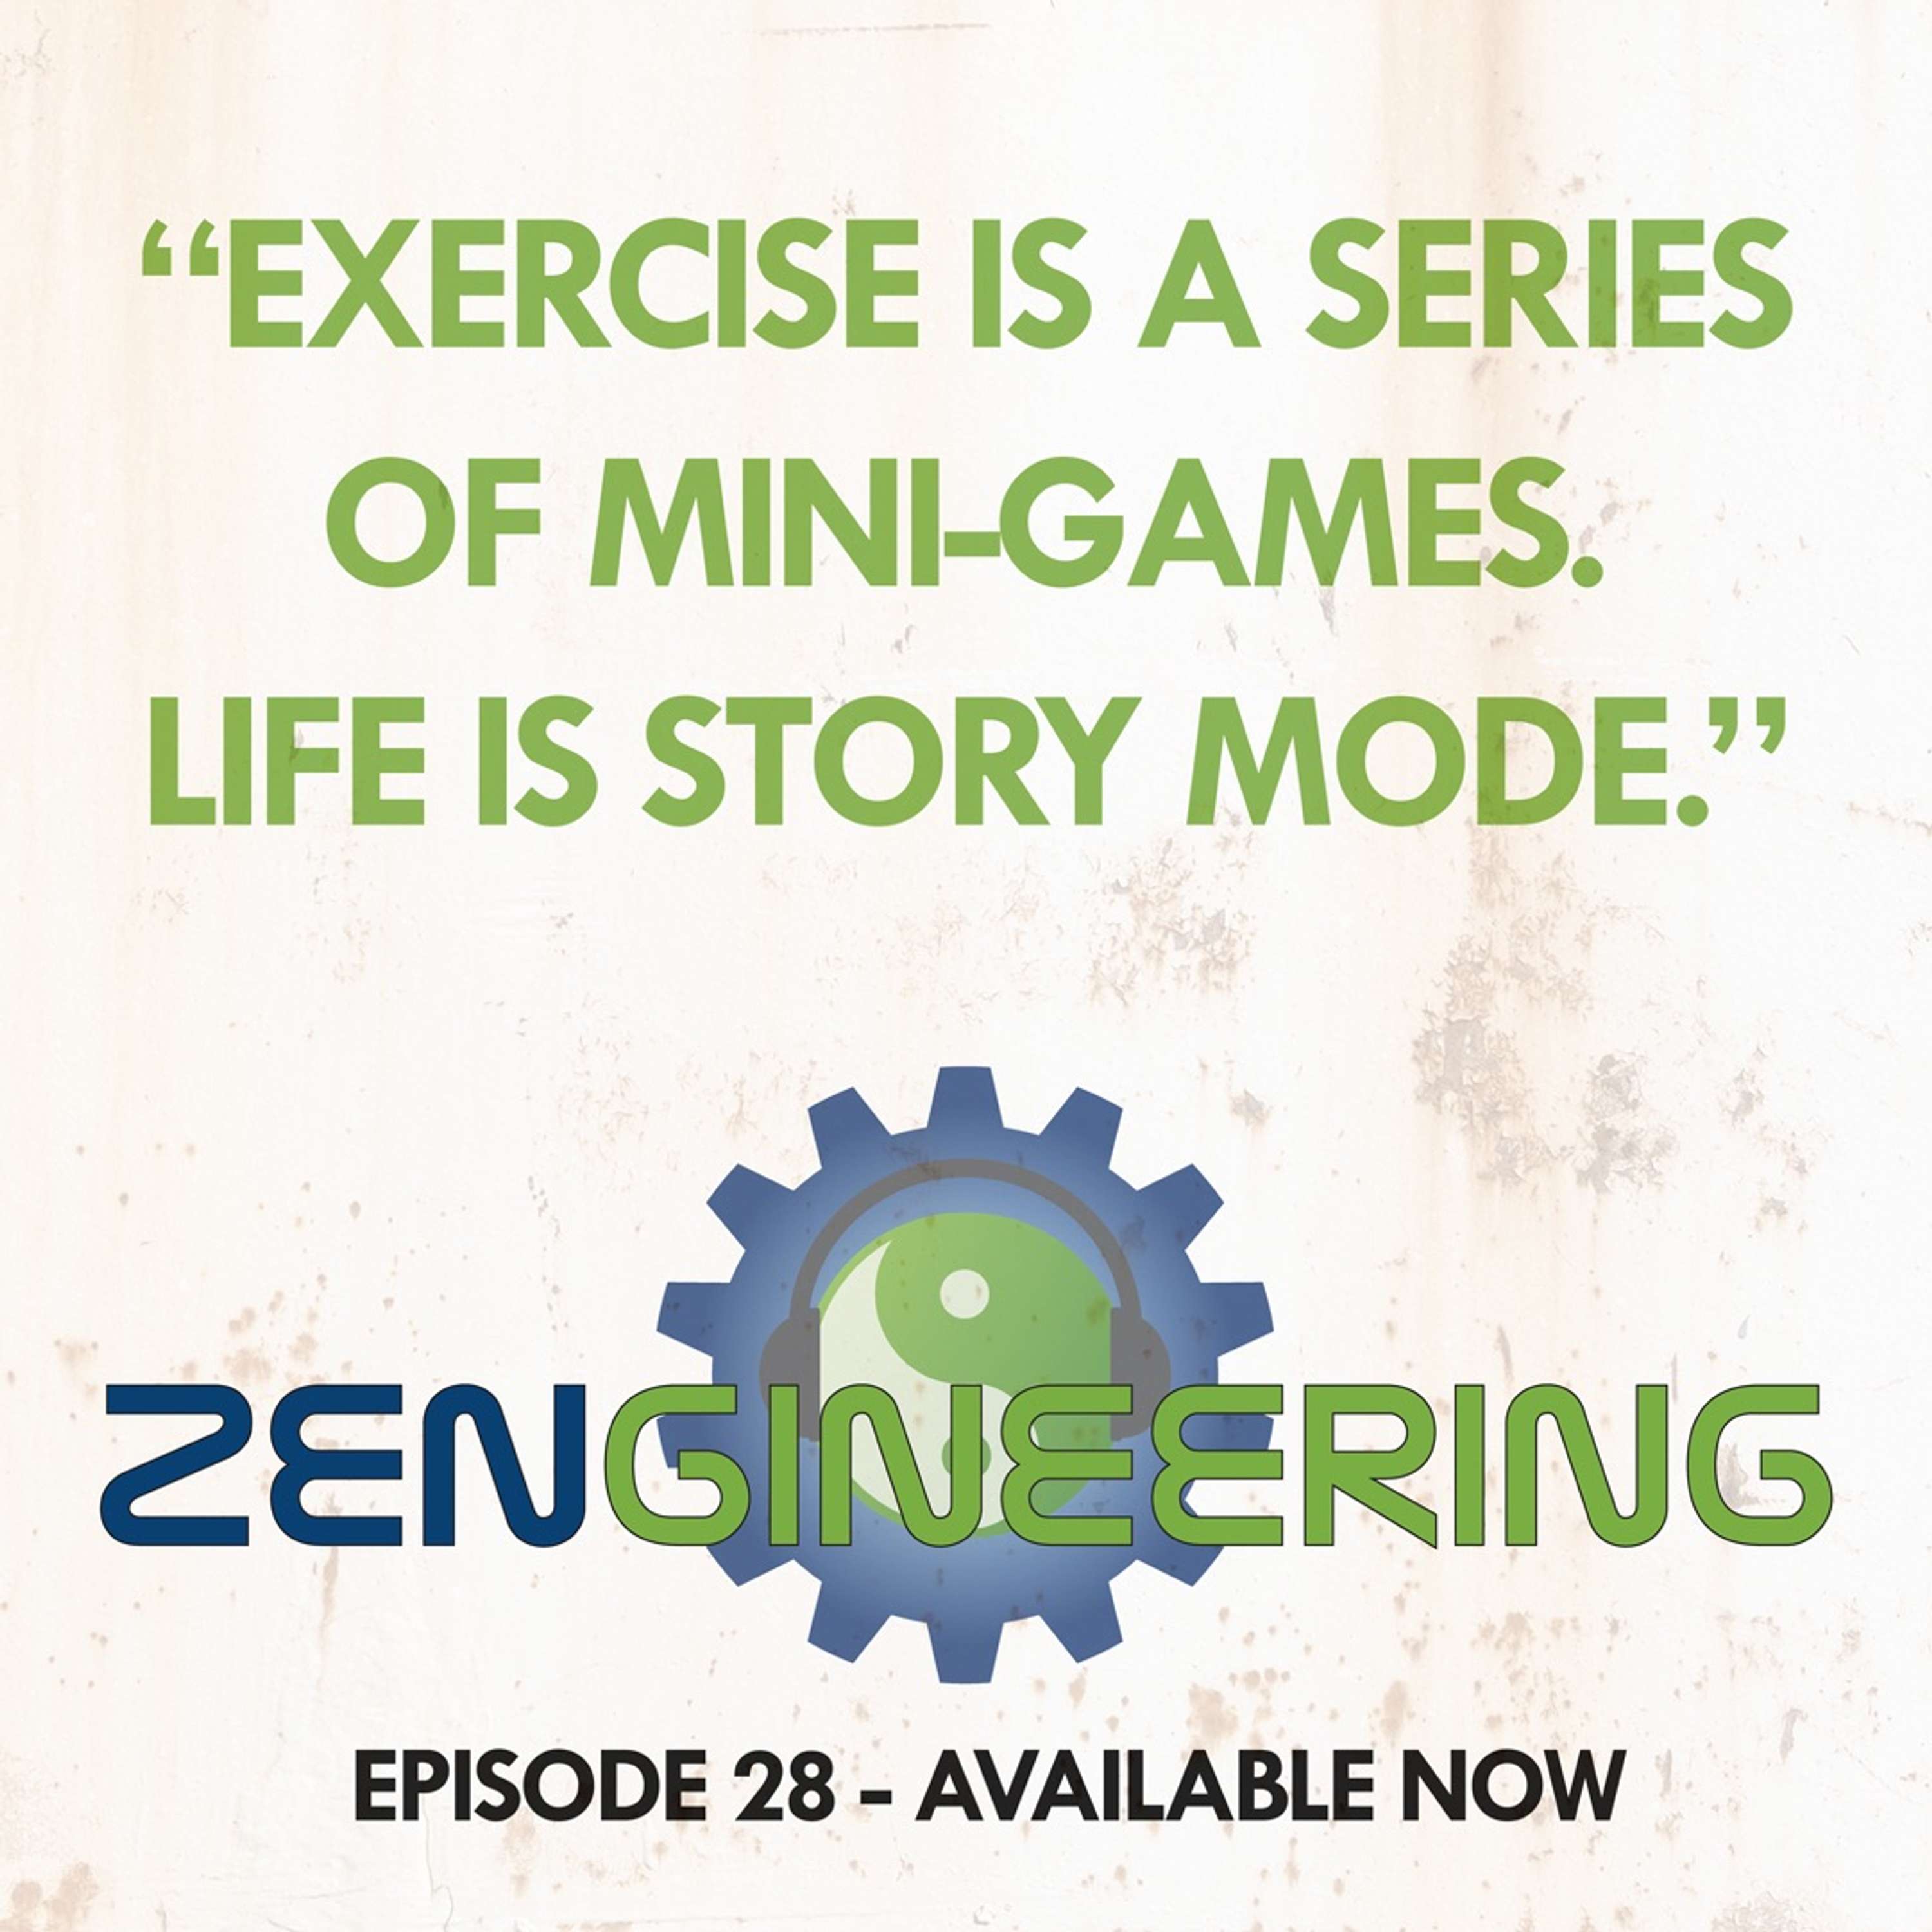 028 - On Crossfit and Being Fit Enough - With Ryan Zaffino